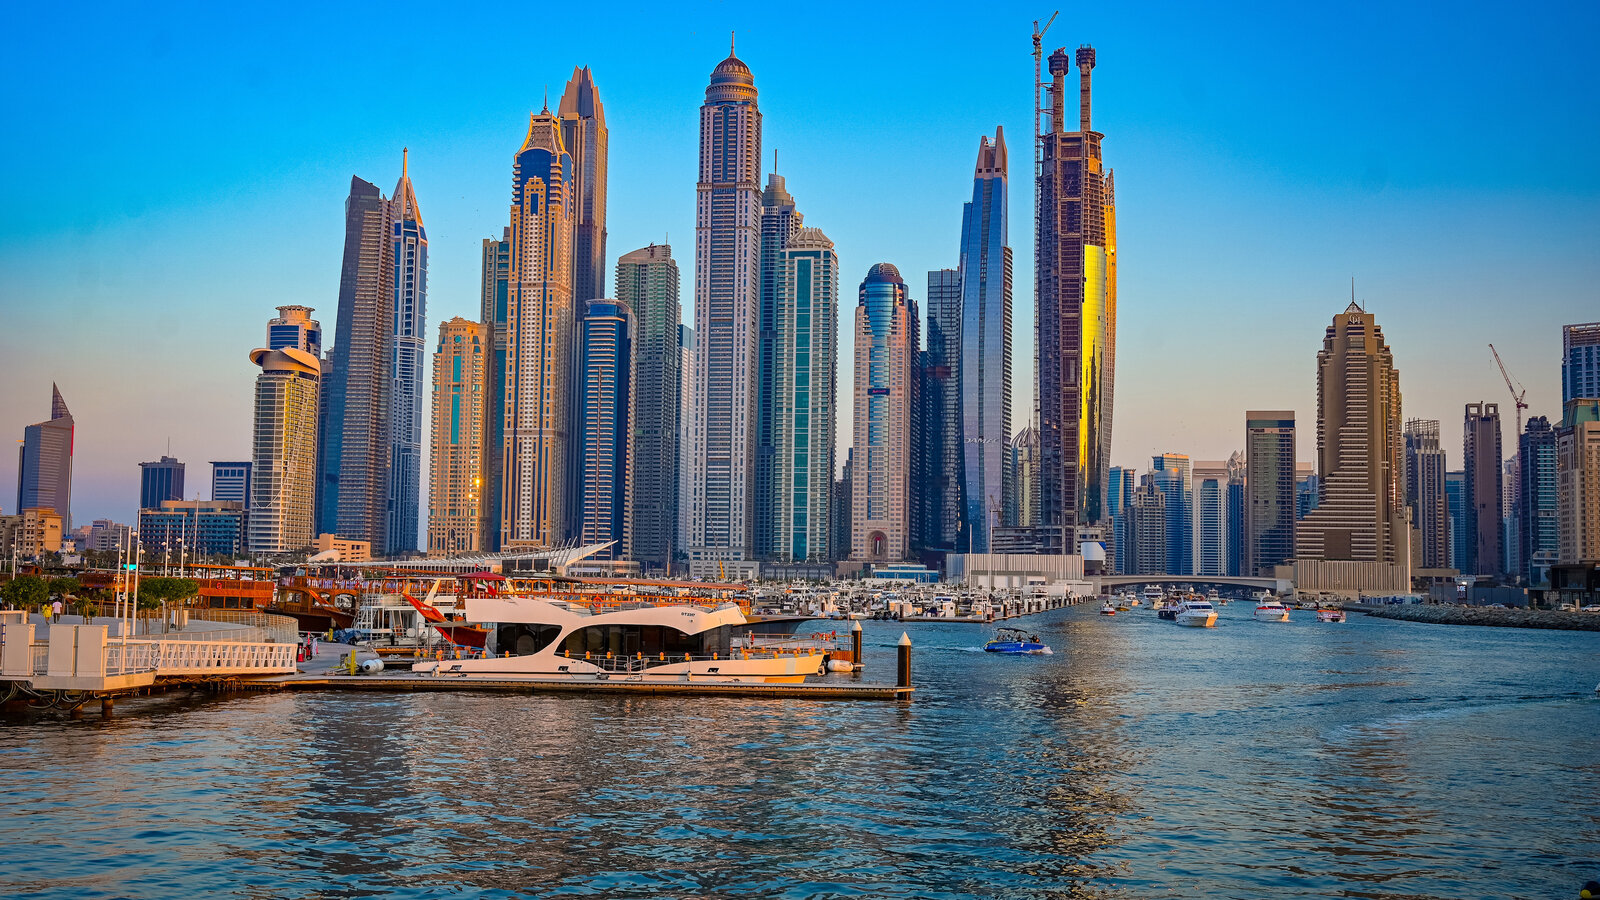 Best Towers in Dubai Marina: the Tallest and Most Renowned Towers